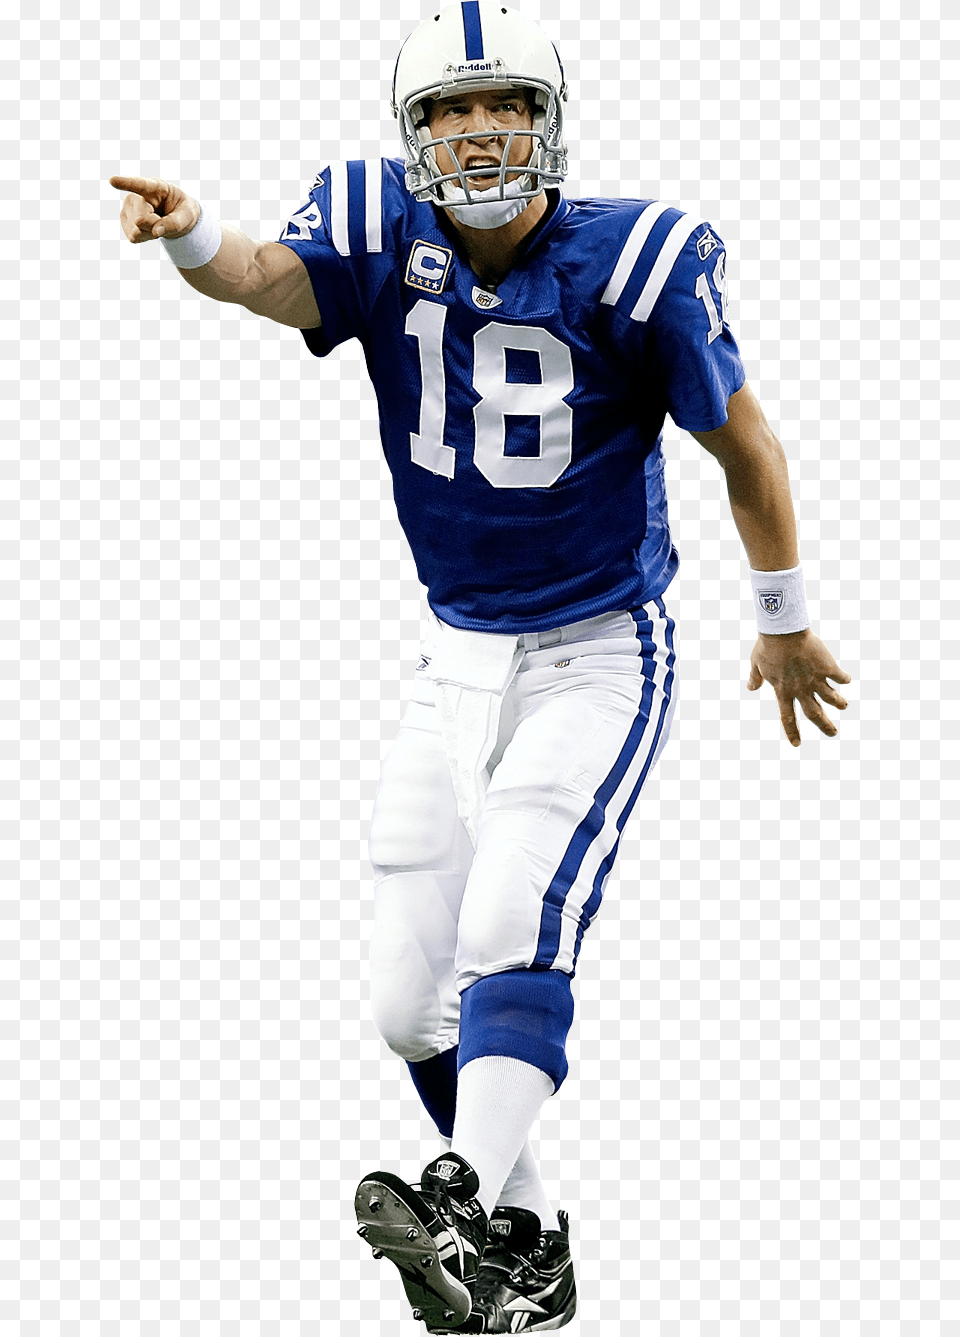 Transparent Peyton Manning Colts Peyton Manning Colts Transparent, Helmet, American Football, Shoe, Playing American Football Free Png Download